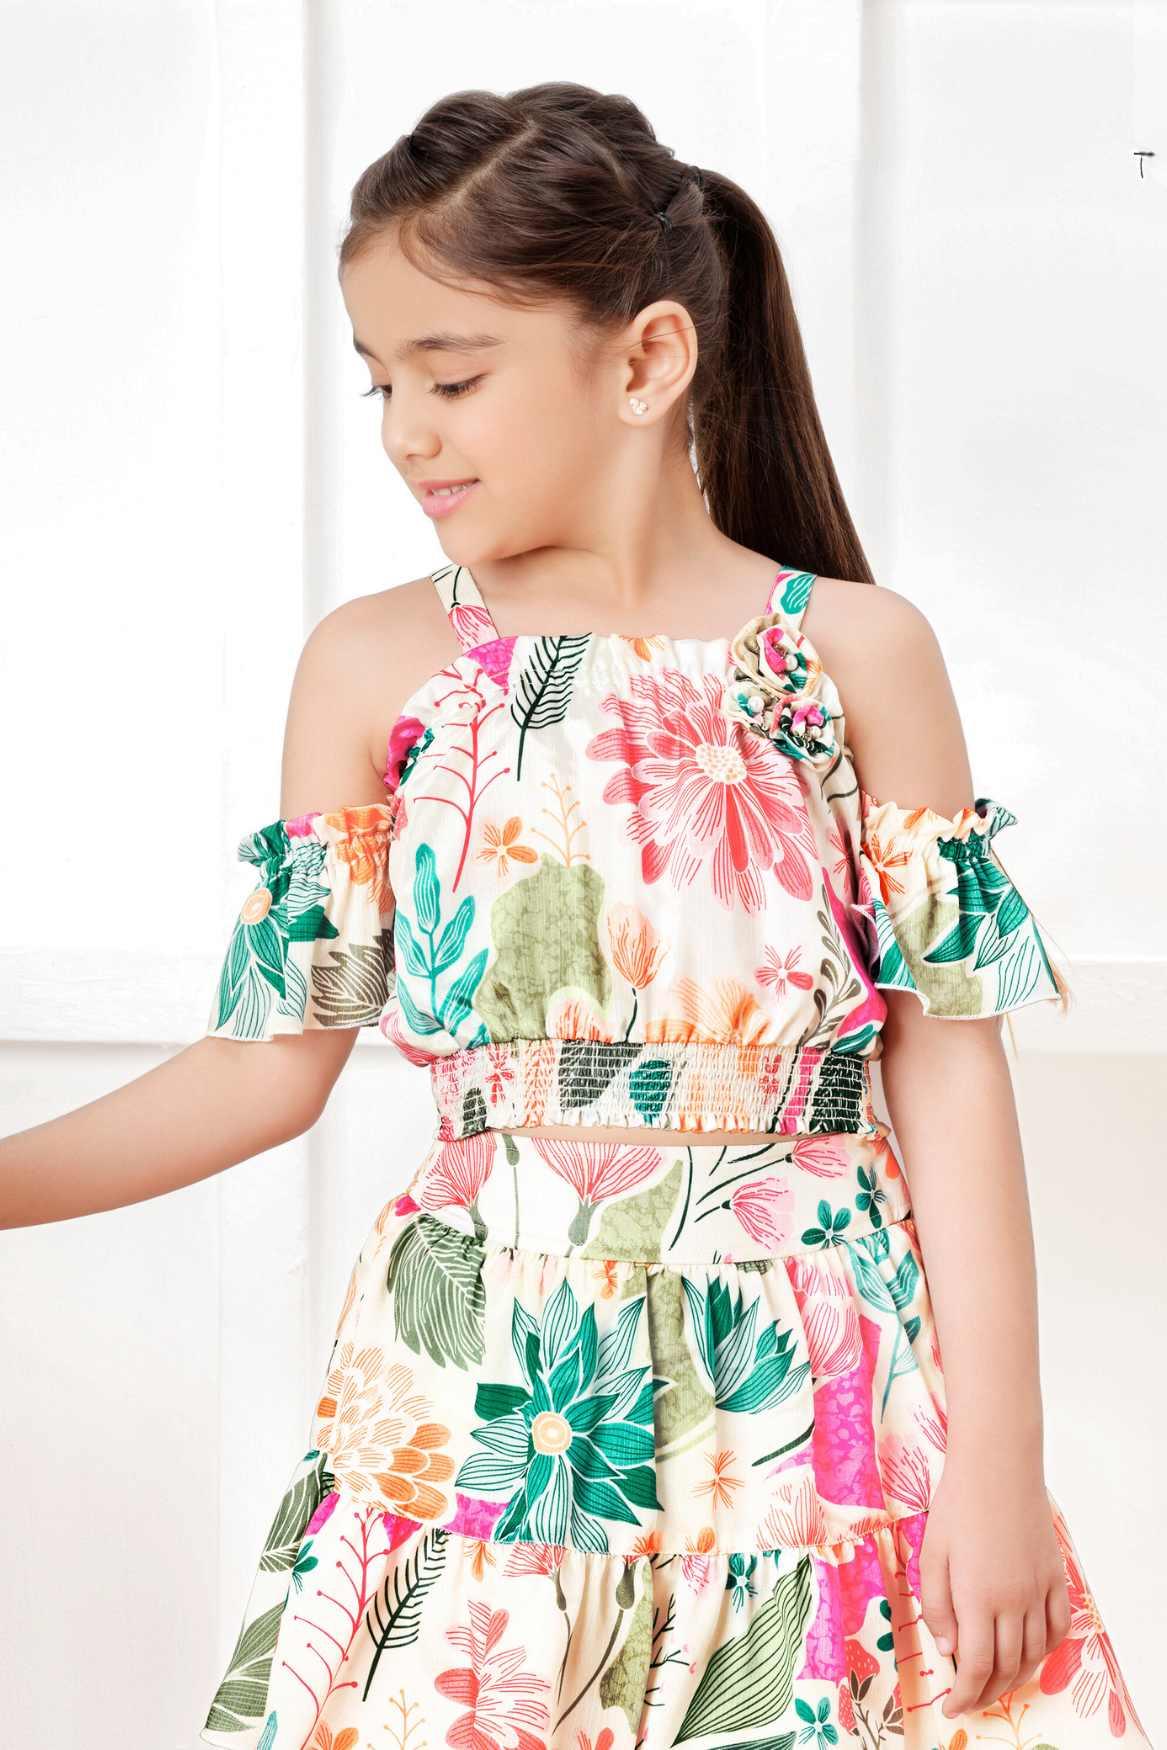 Cream Floral Printed Top And Skirt Set For Girls - Lagorii Kids